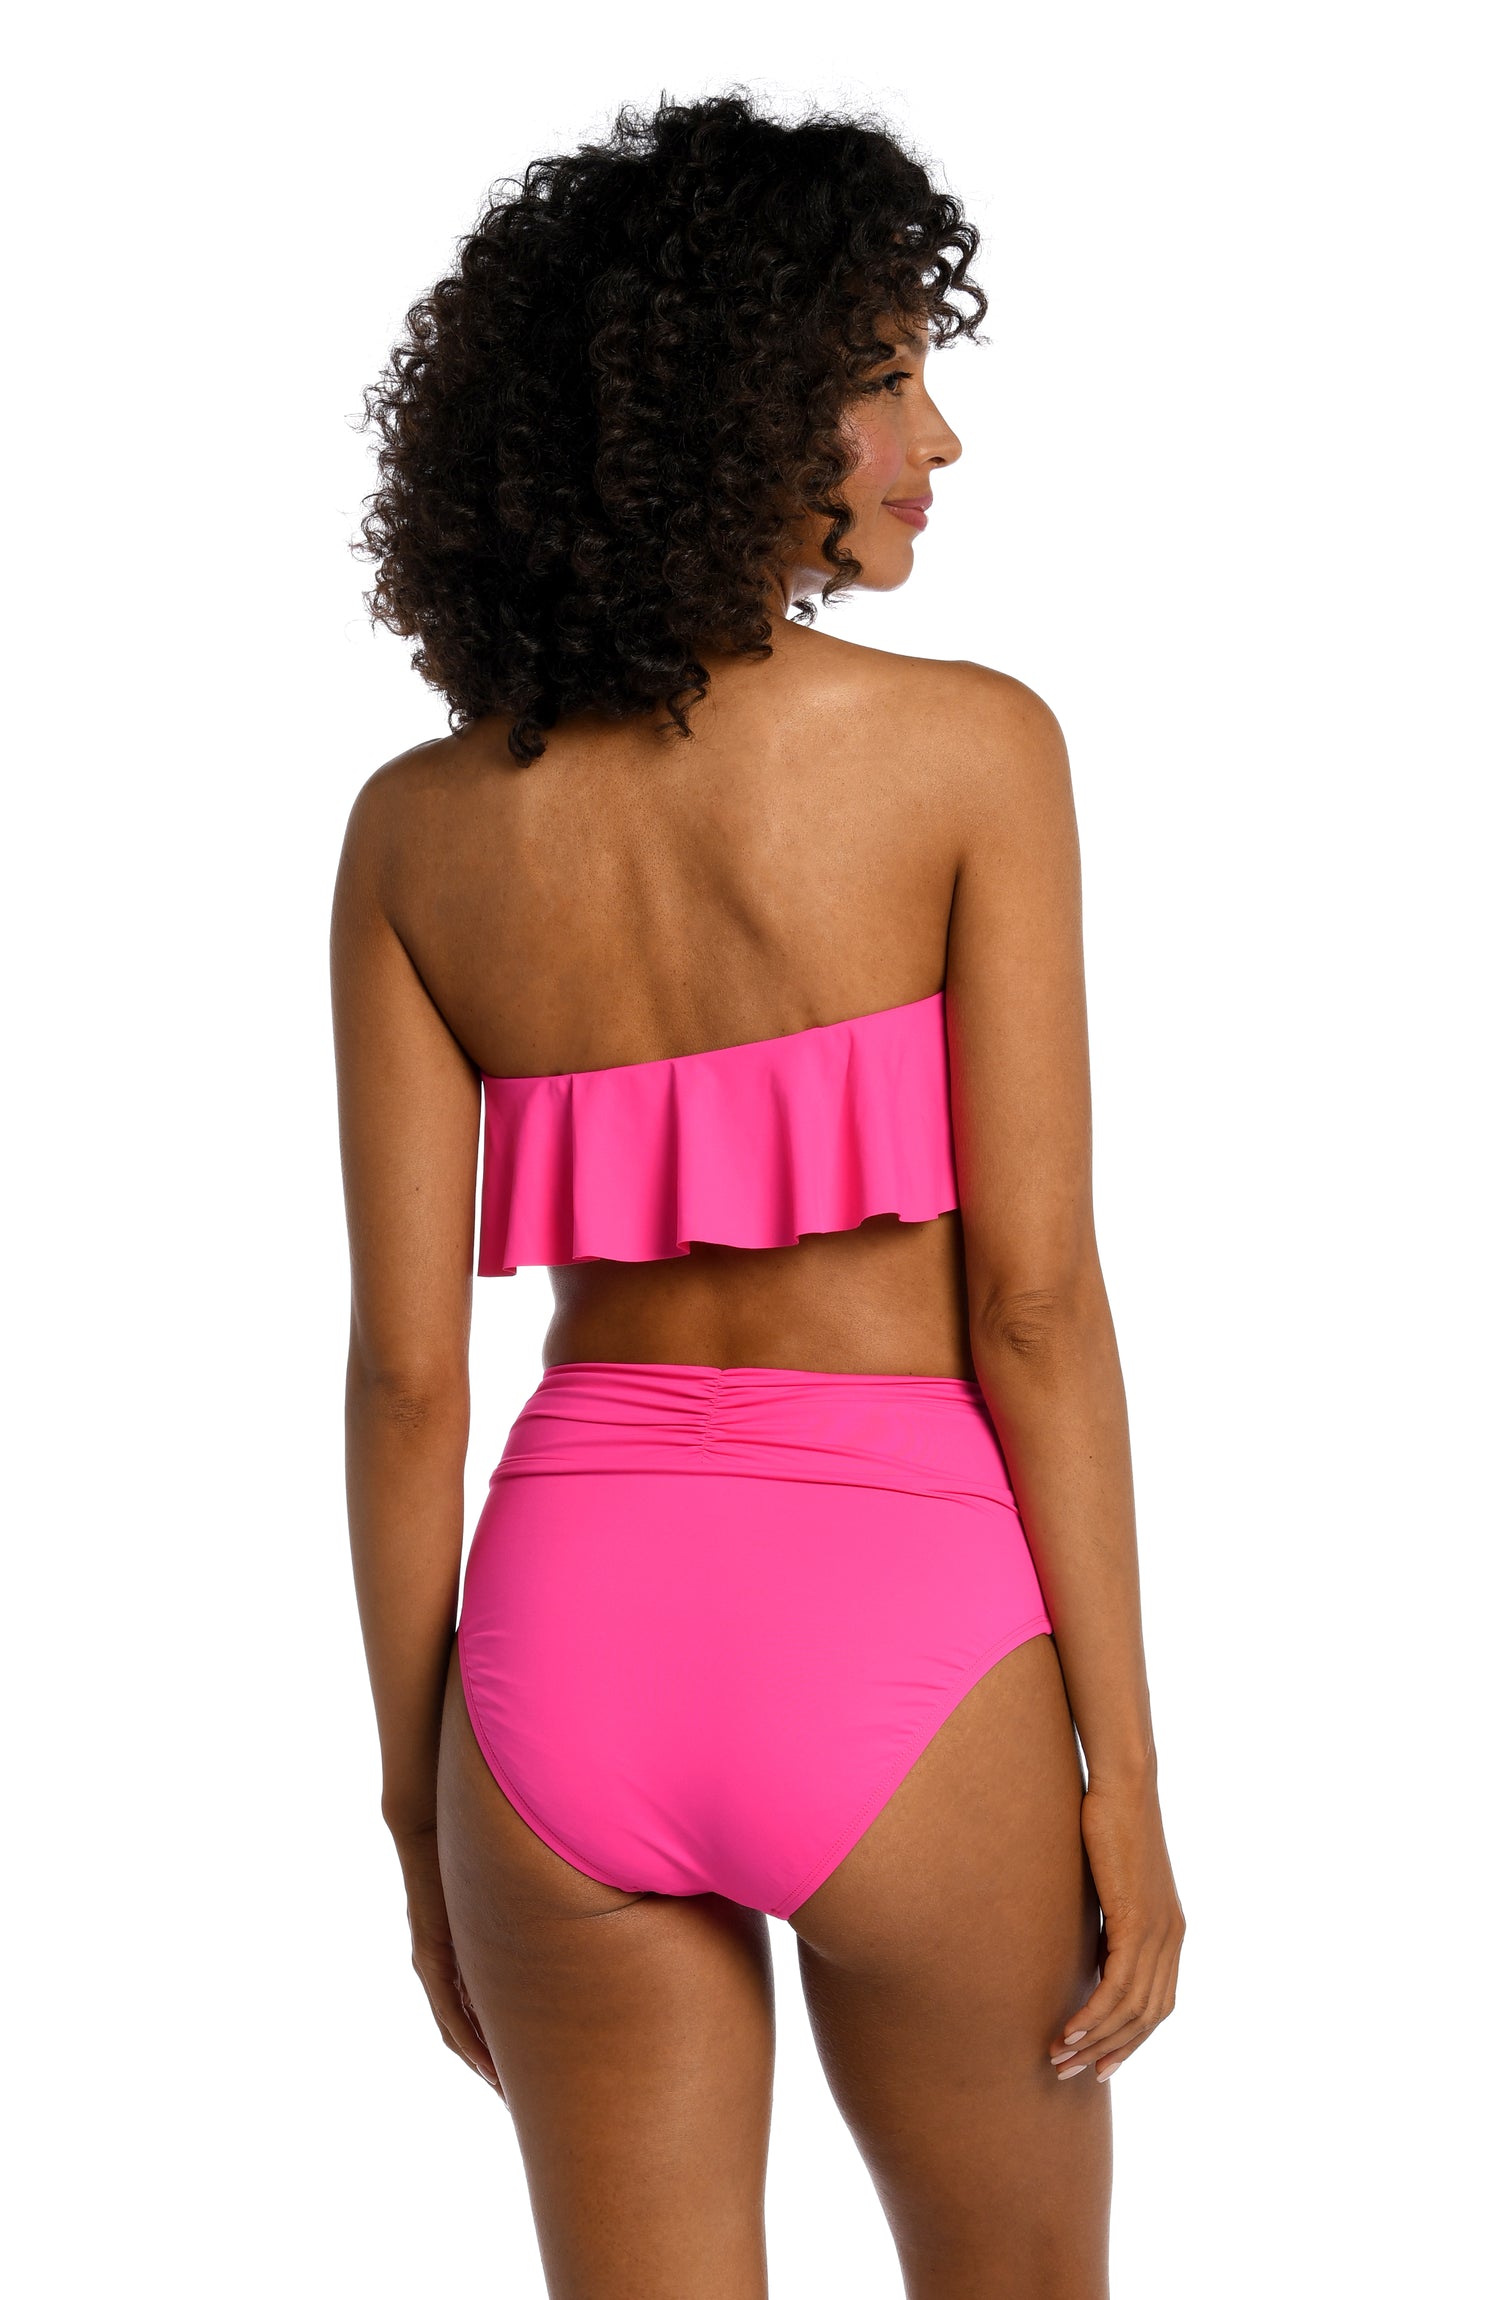 Model is wearing a pop pink colored ruffle bandeau swimsuit top from our Best-Selling Island Goddess collection.